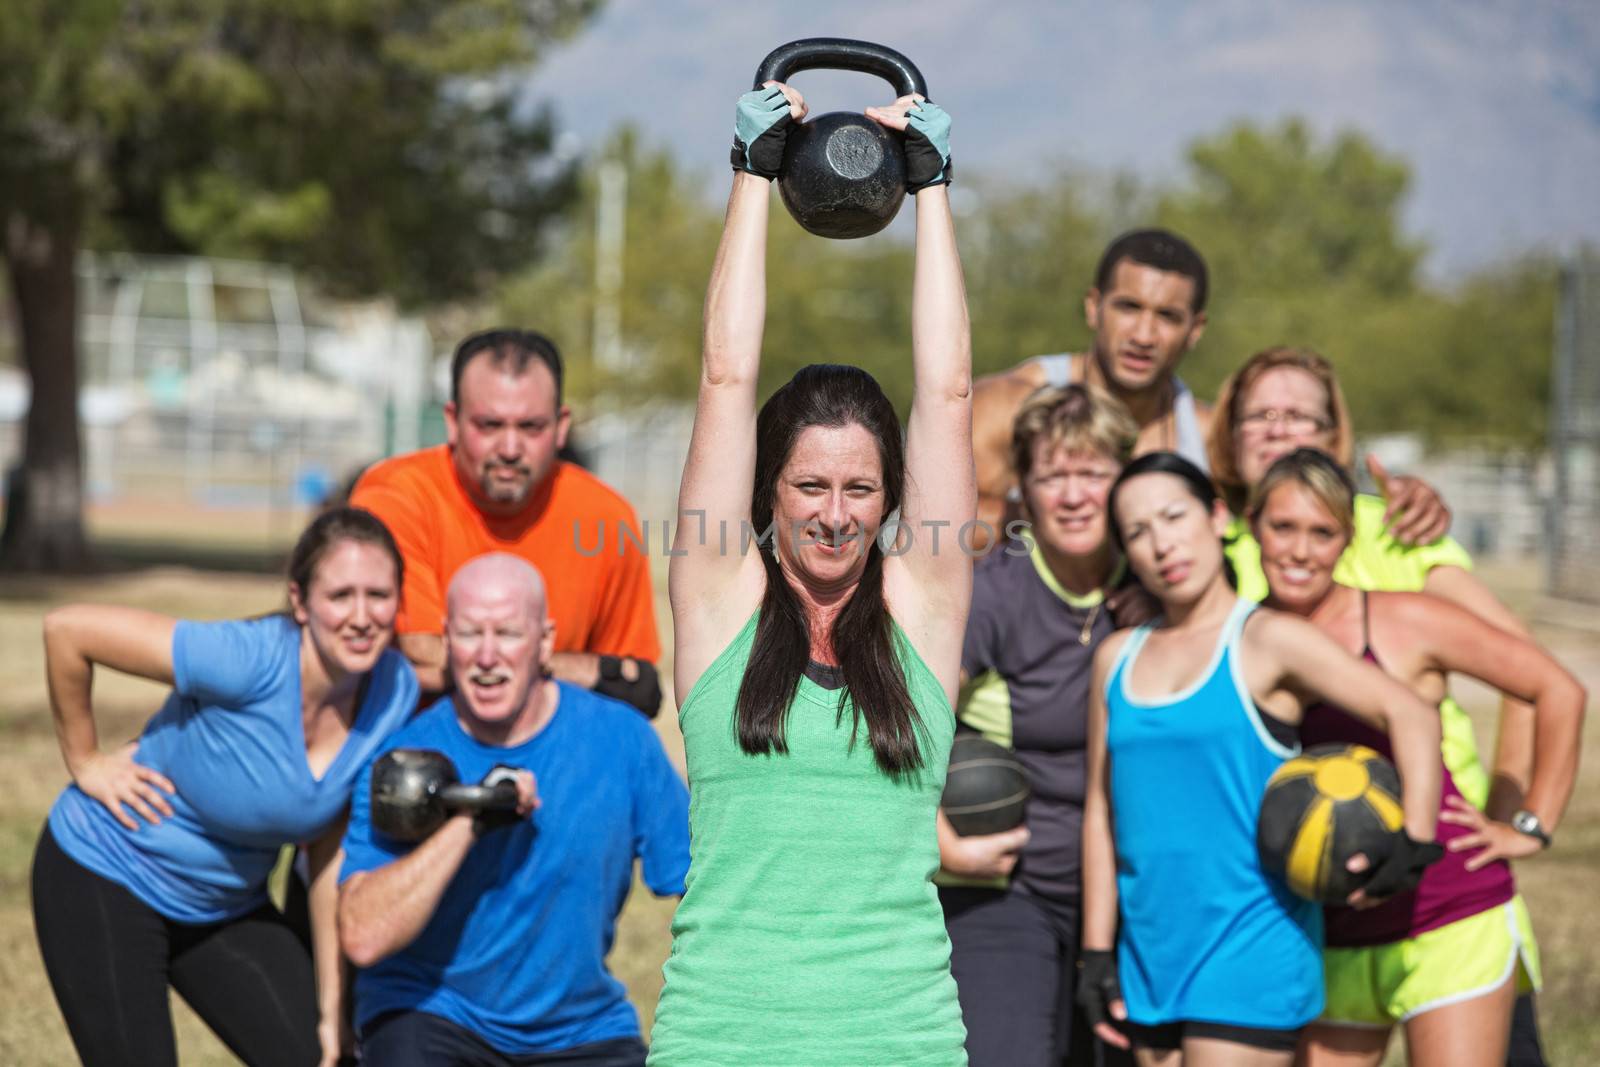 Group of people watching woman lifting kettle bell weights